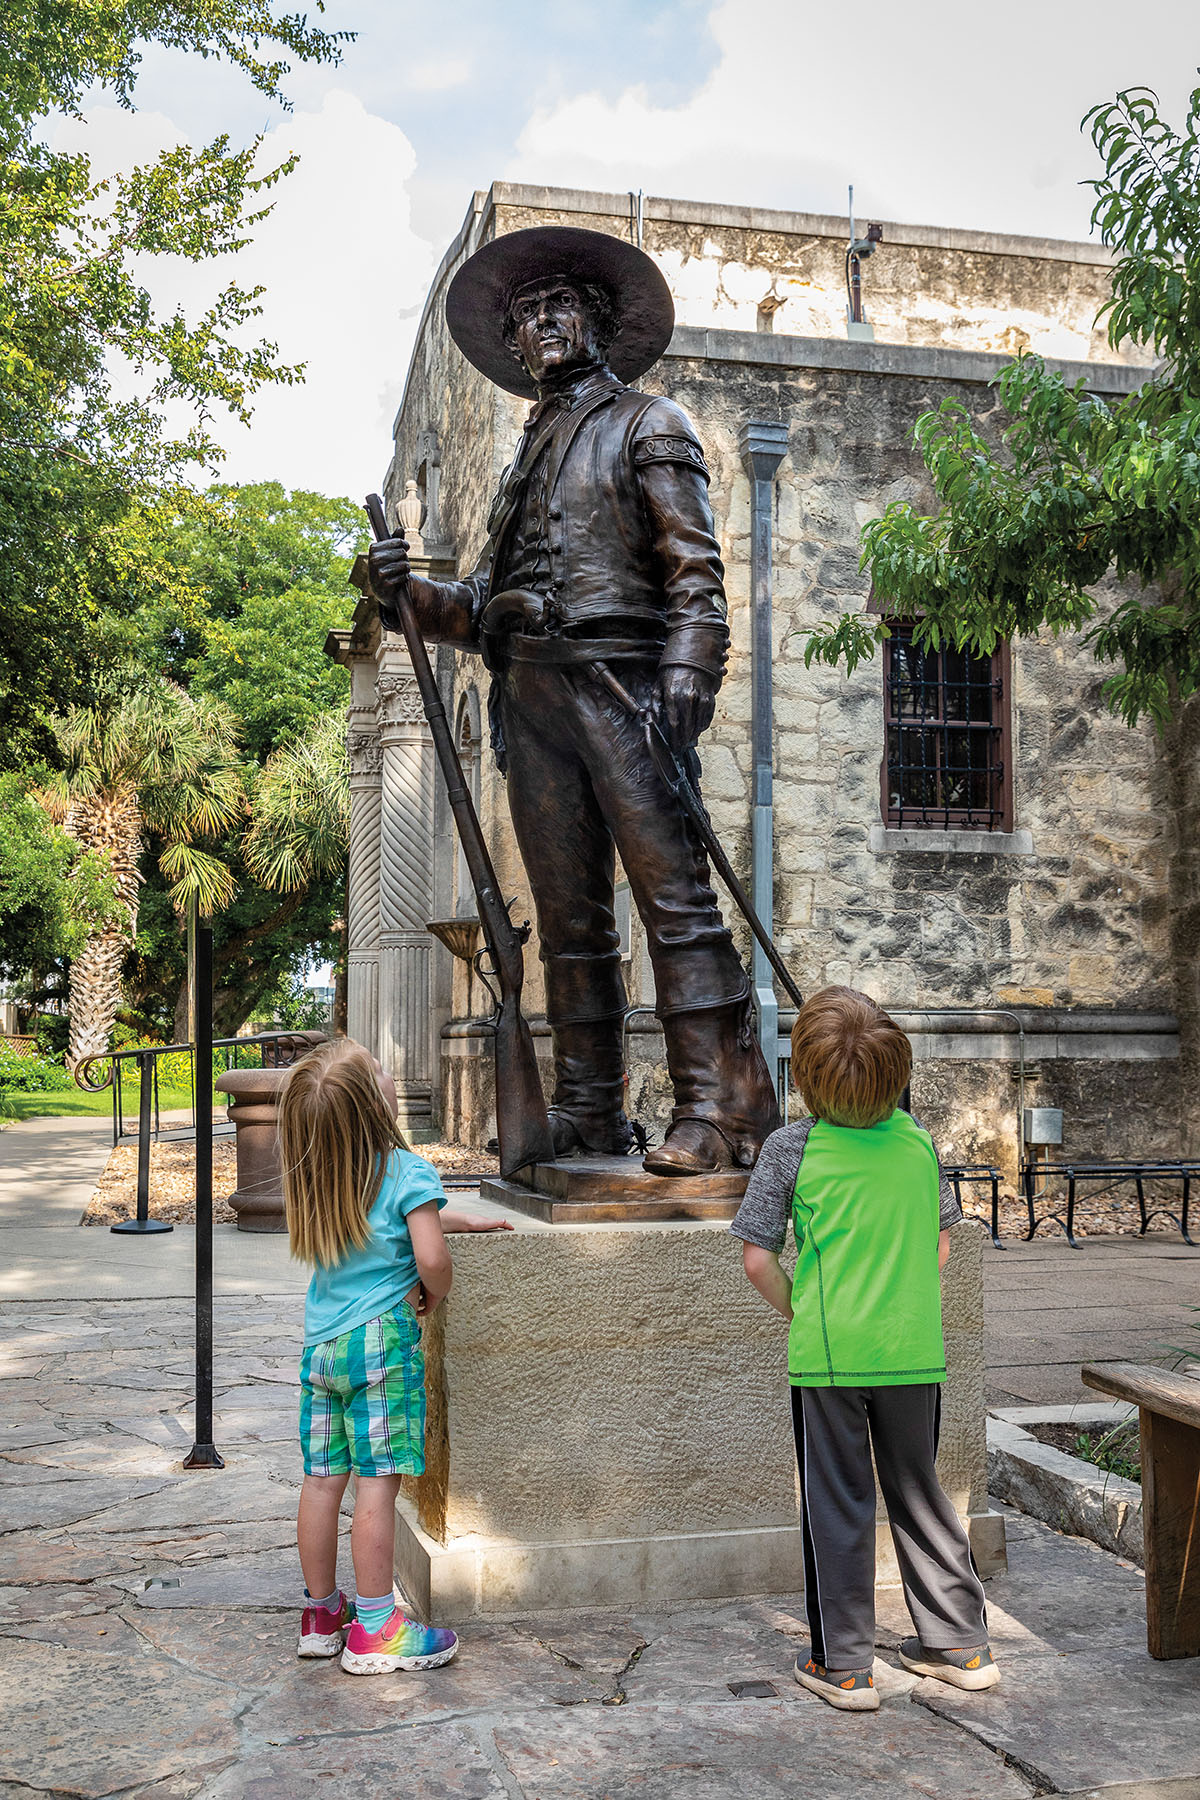 Two childen look up at a dark bronze statue of a man in a large hat holding a sword